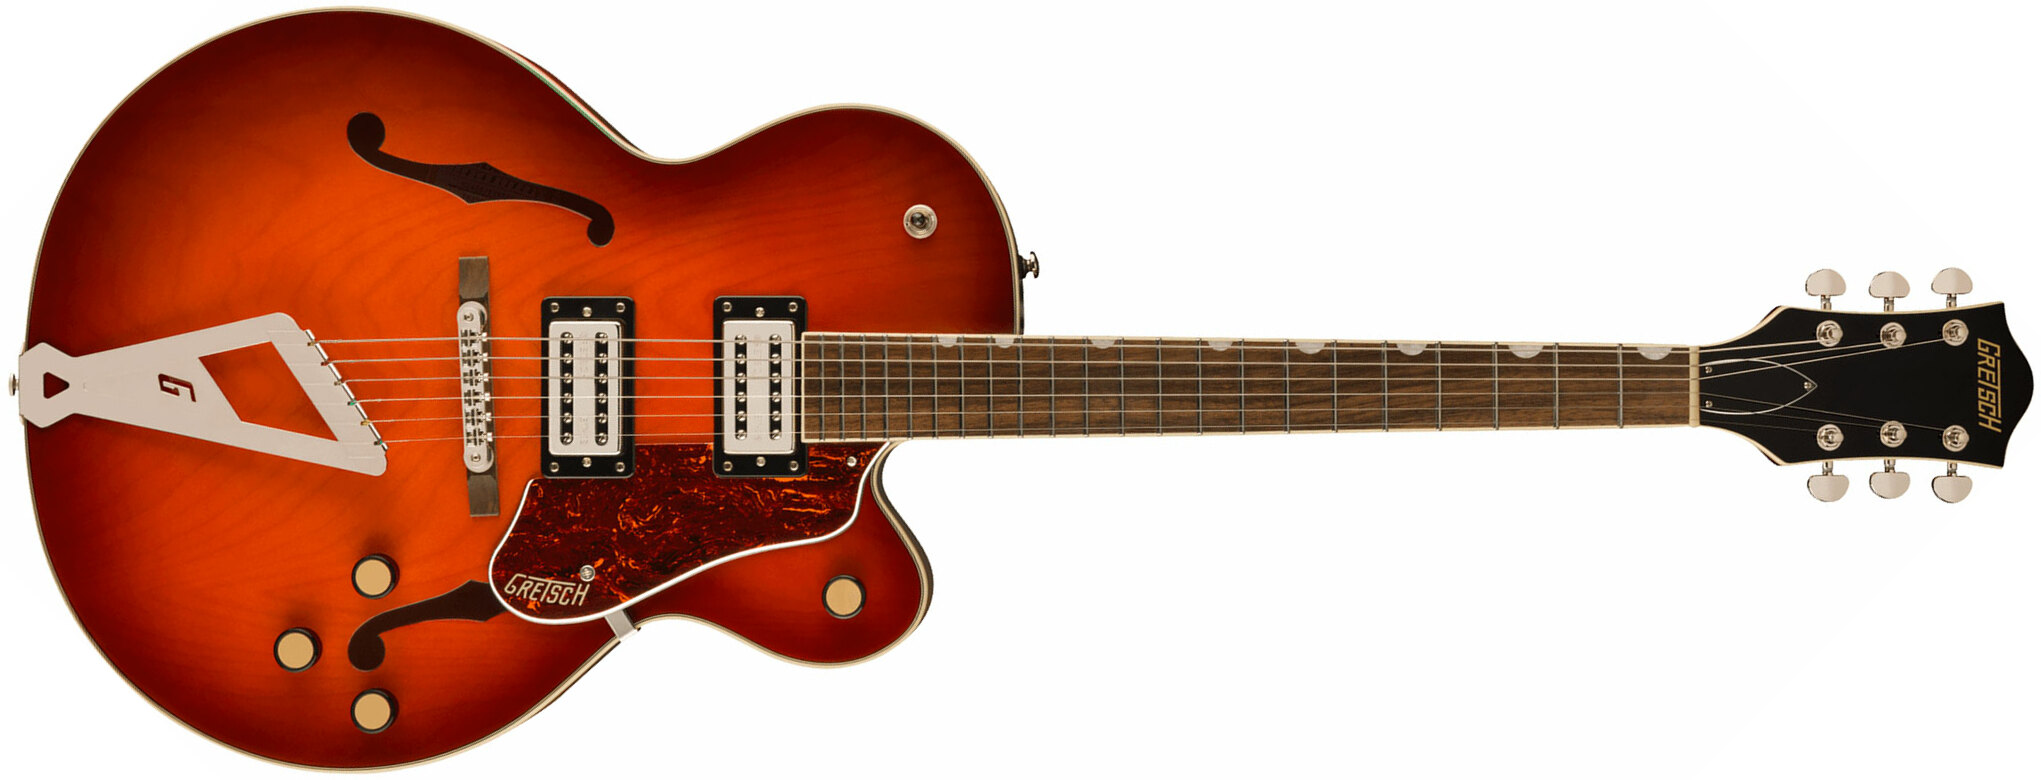 Gretsch G2420 Streamliner Hollow Body With Chromatic Ii 2h Ht Lau - Fireburst - Guitare Électrique 3/4 Caisse & Jazz - Main picture